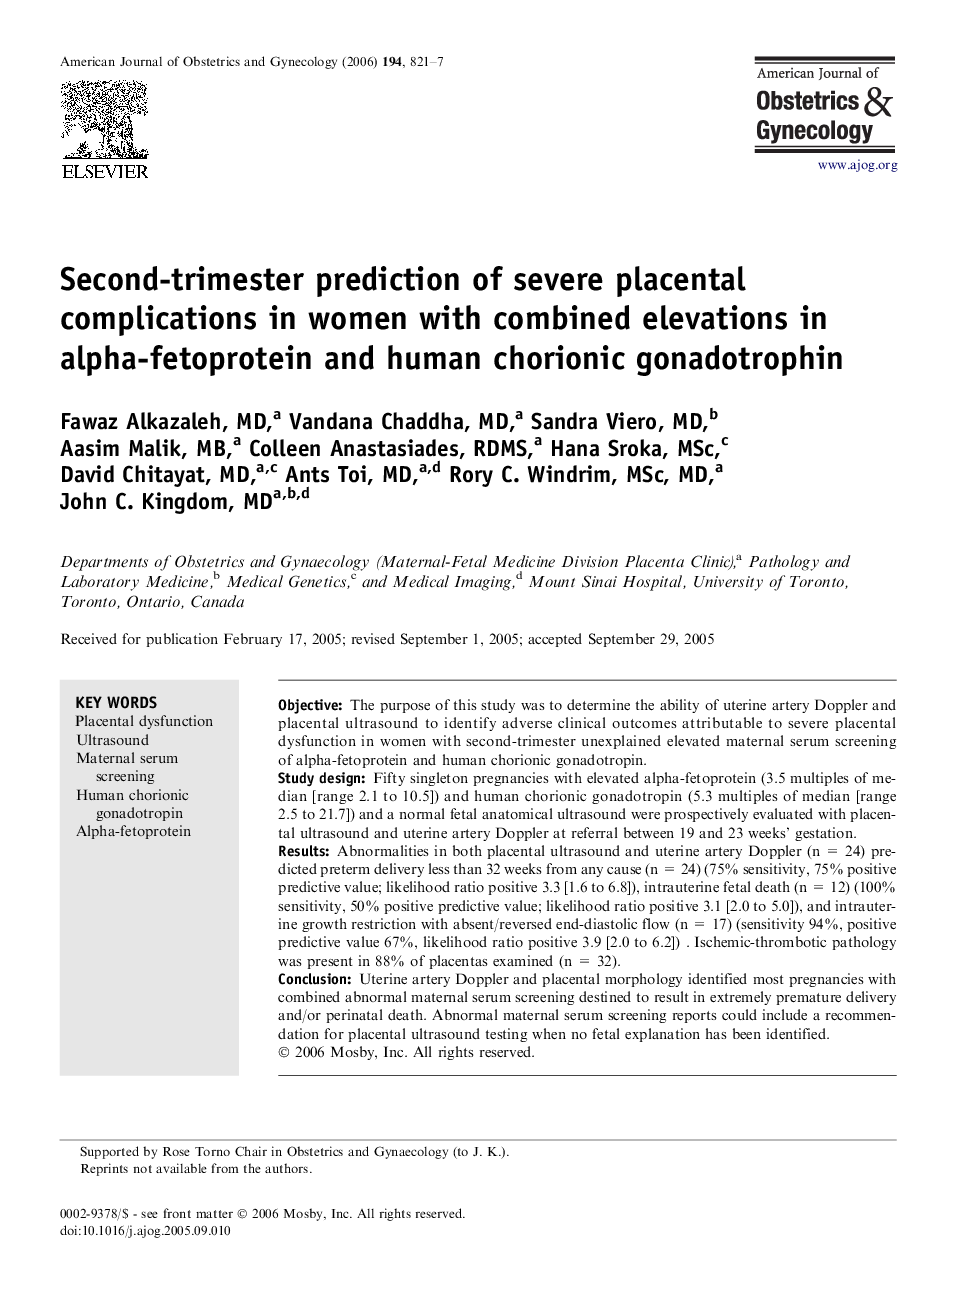 Second-trimester prediction of severe placental complications in women with combined elevations in alpha-fetoprotein and human chorionic gonadotrophin 